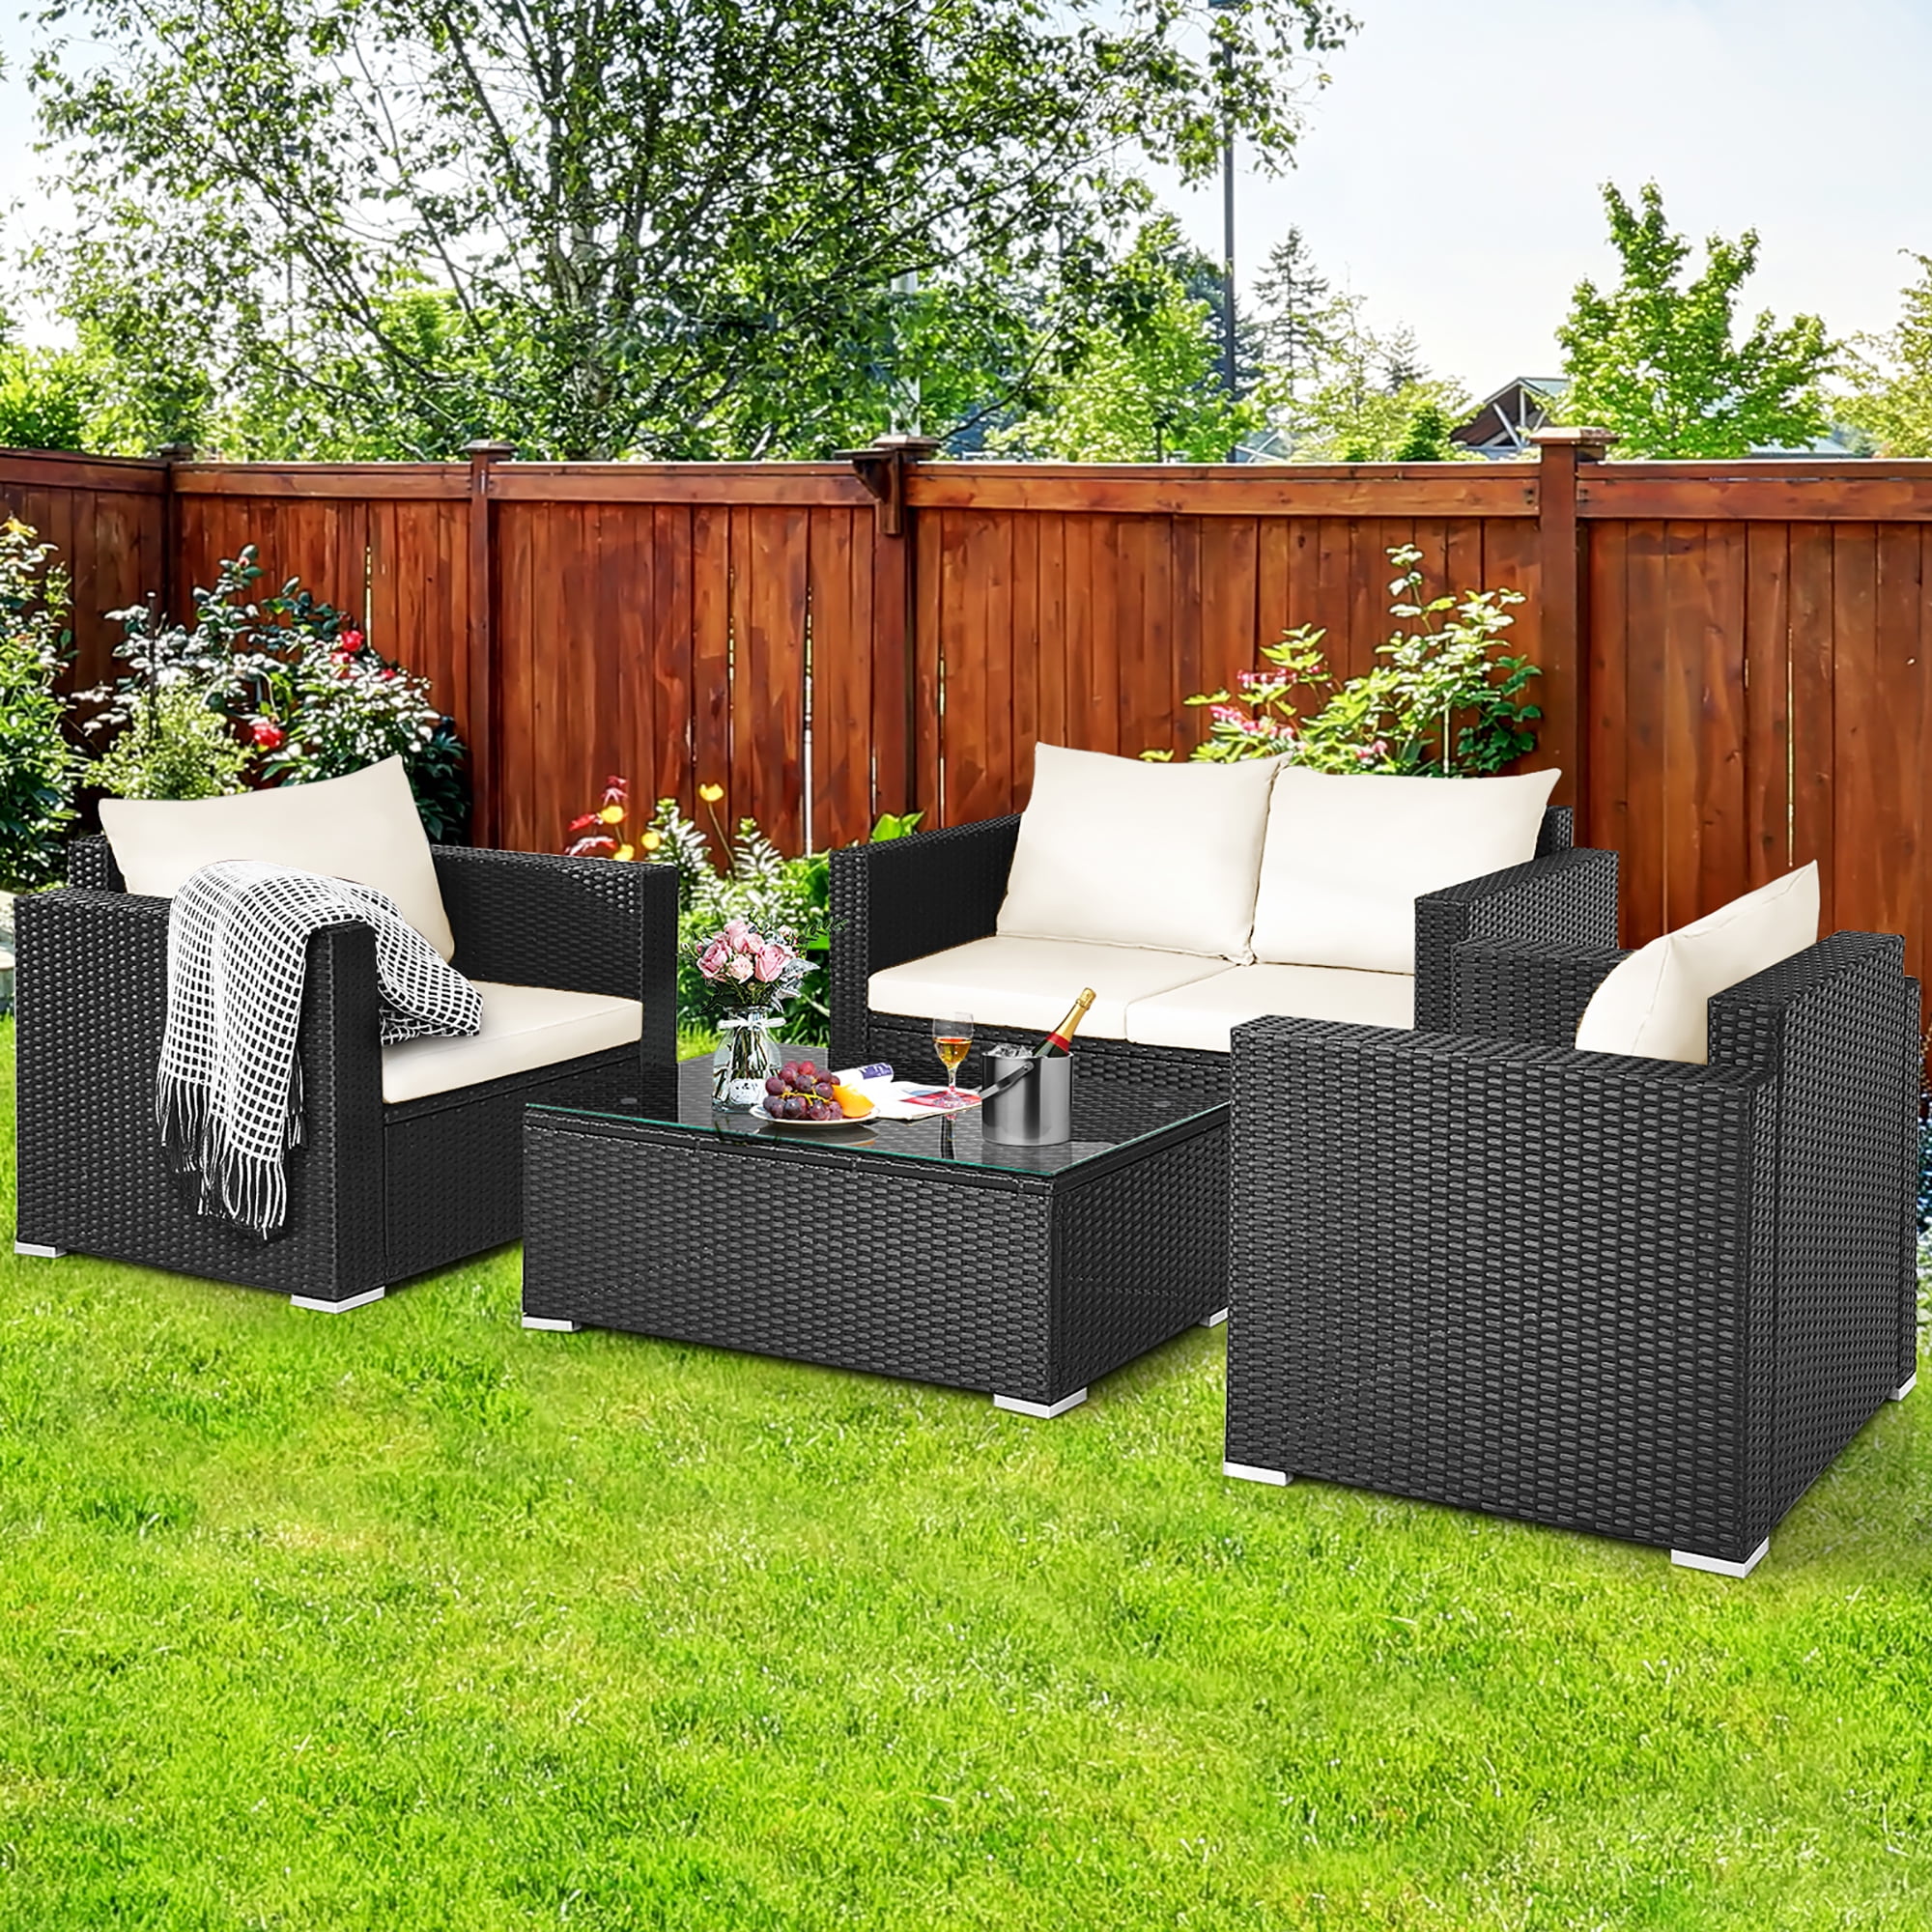 Inde astronomi partner Costway 4PCS Patio Rattan Furniture Set Cushioned Sofa Chair Coffee Table  Off White - Walmart.com